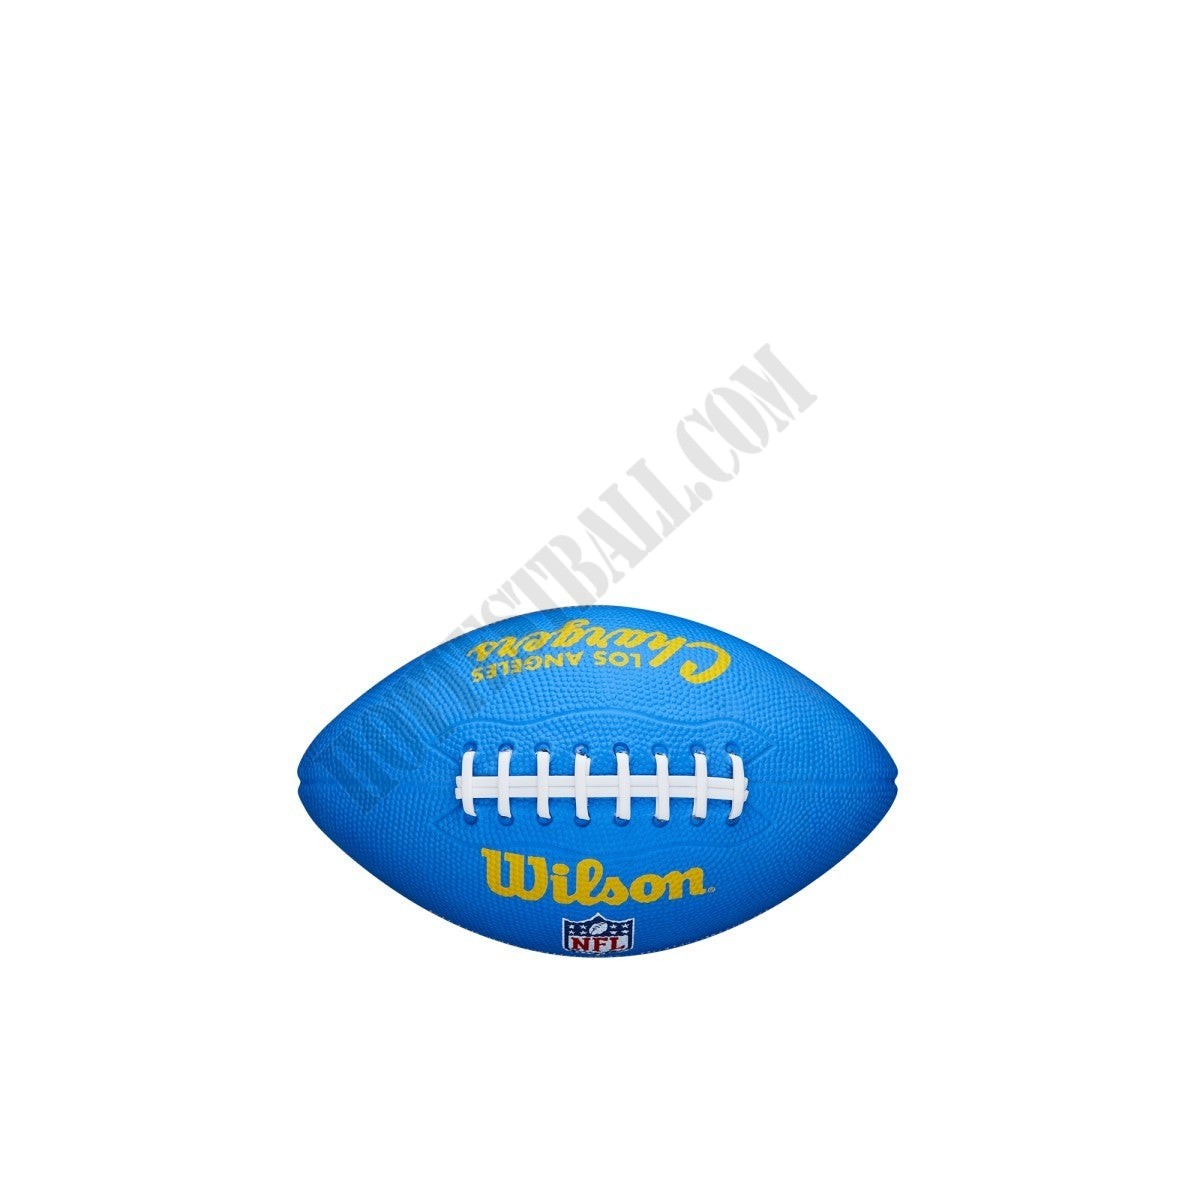 NFL Retro Mini Football - Los Angeles Chargers - Wilson Discount Store - -2